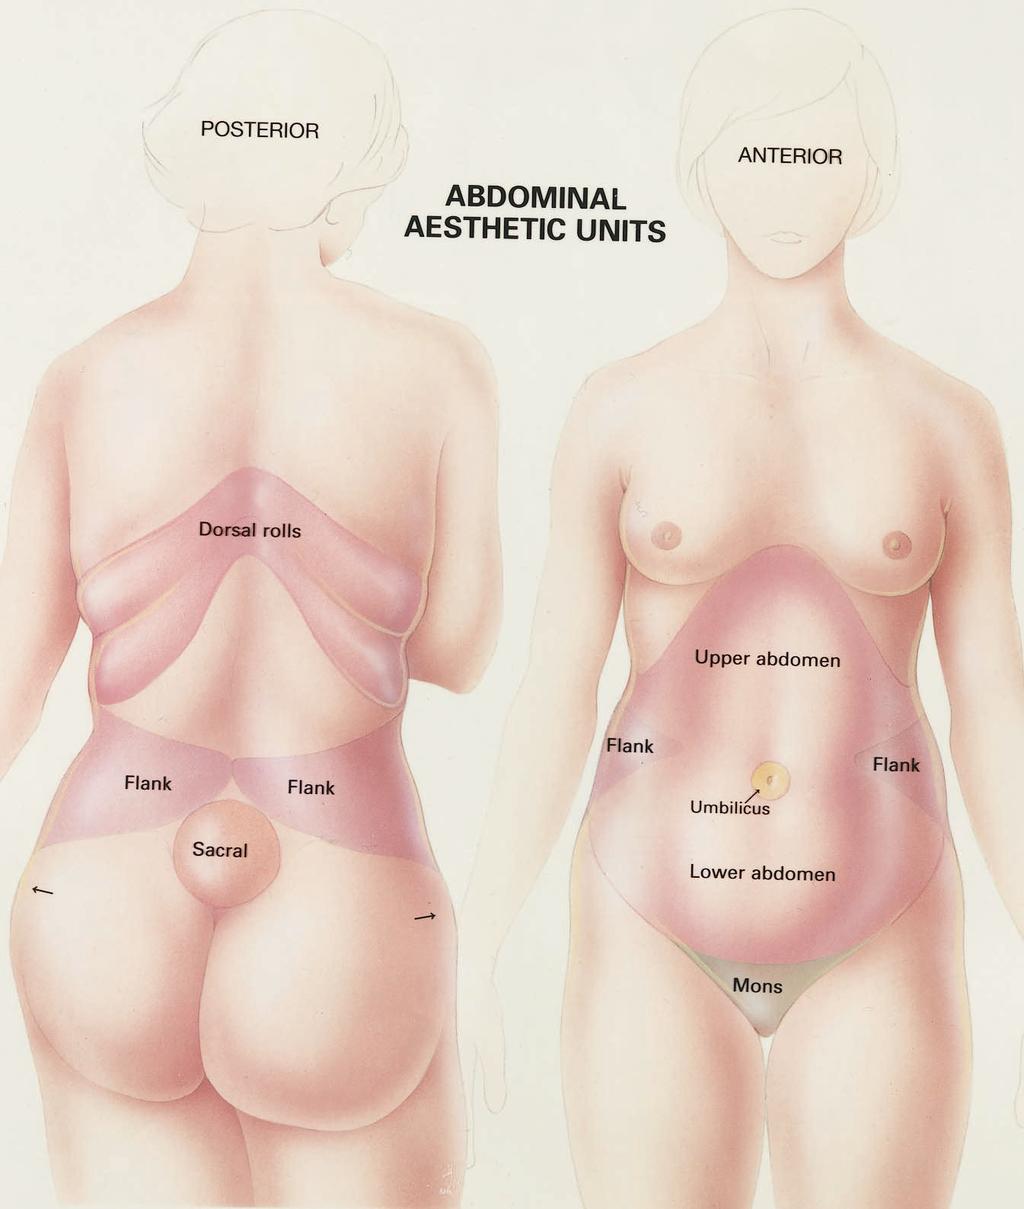 1200 PLASTIC AND RECONSTRUCTIVE SURGERY, October 2000 are many abdominal contour operations available, they are not interchangeable; liposuction, limited abdominoplasty, and full abdominoplasty, with